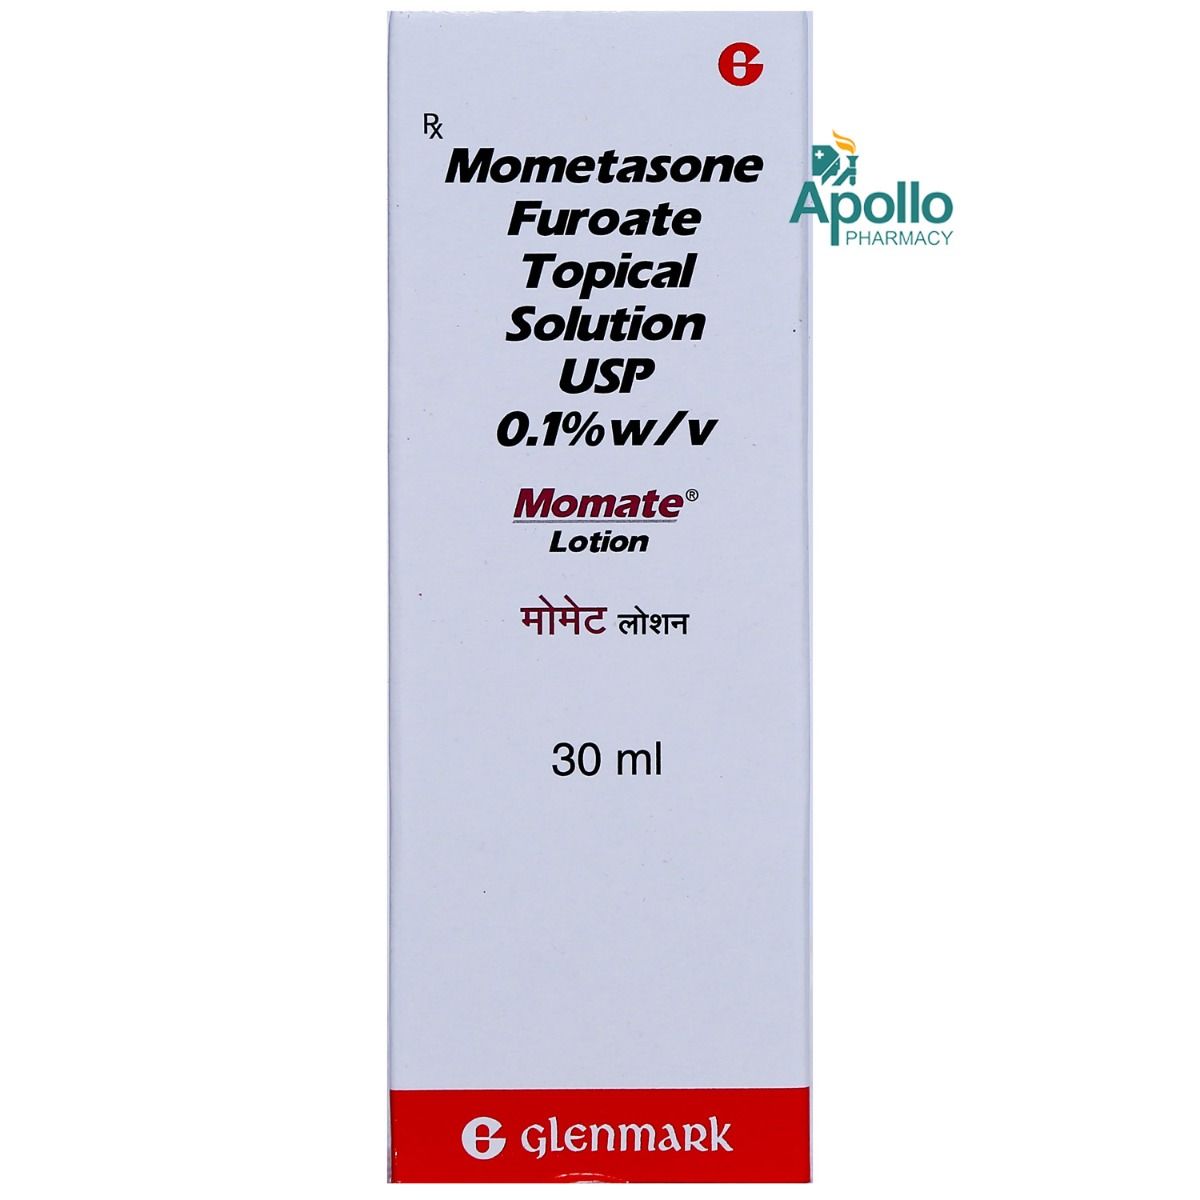 Momate Lotion 30 ml Price, Uses, Side Effects, Composition - Apollo Pharmacy